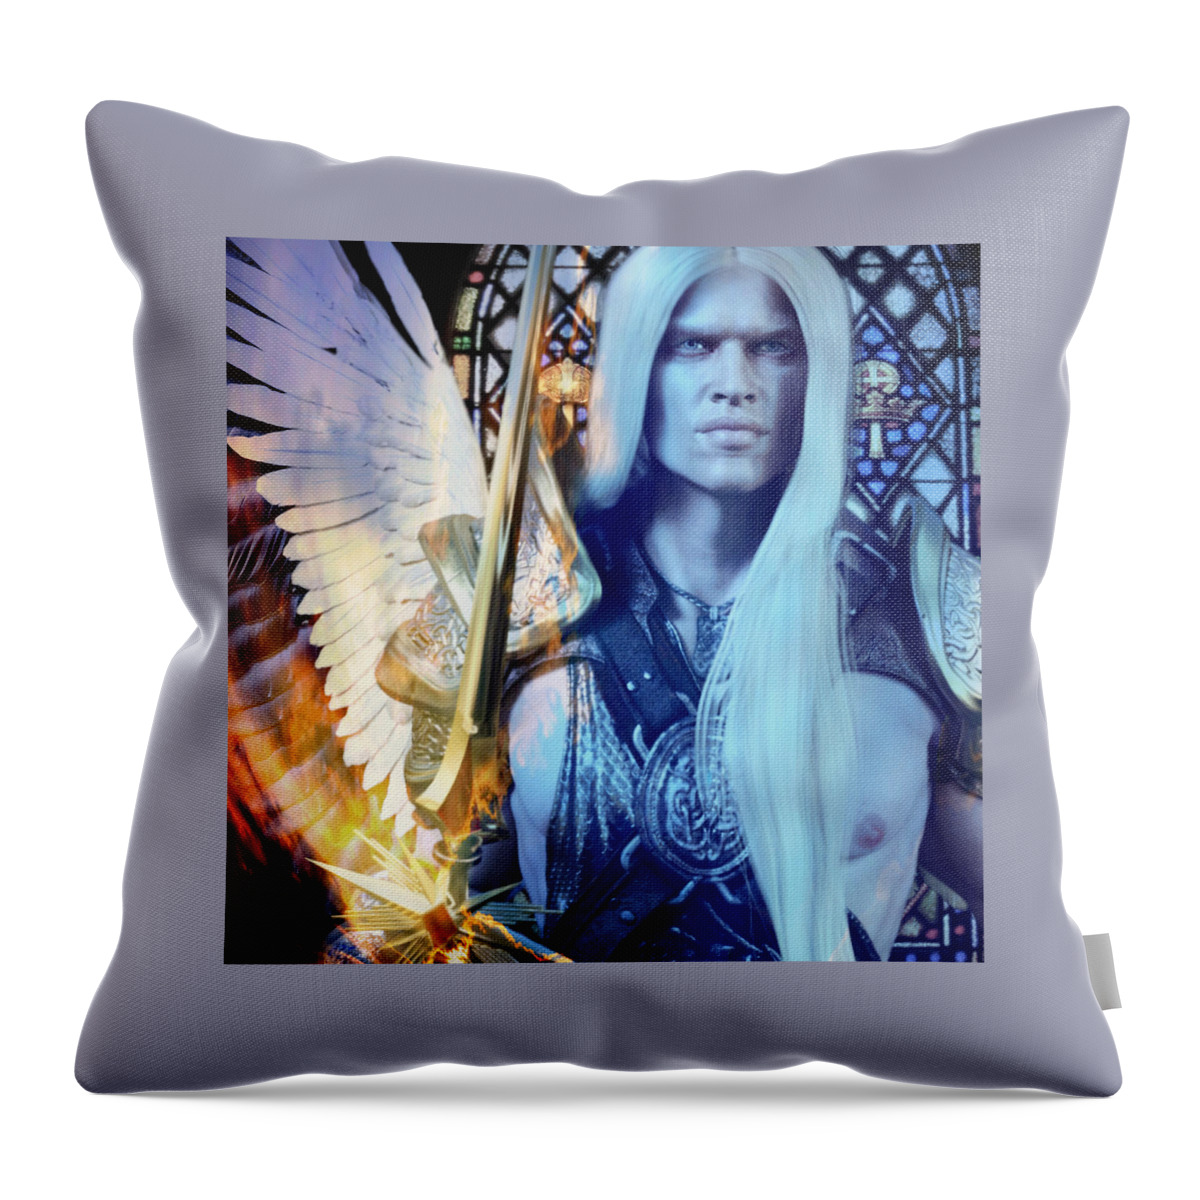 Angel Throw Pillow featuring the digital art The Guardian #2 by Suzanne Silvir